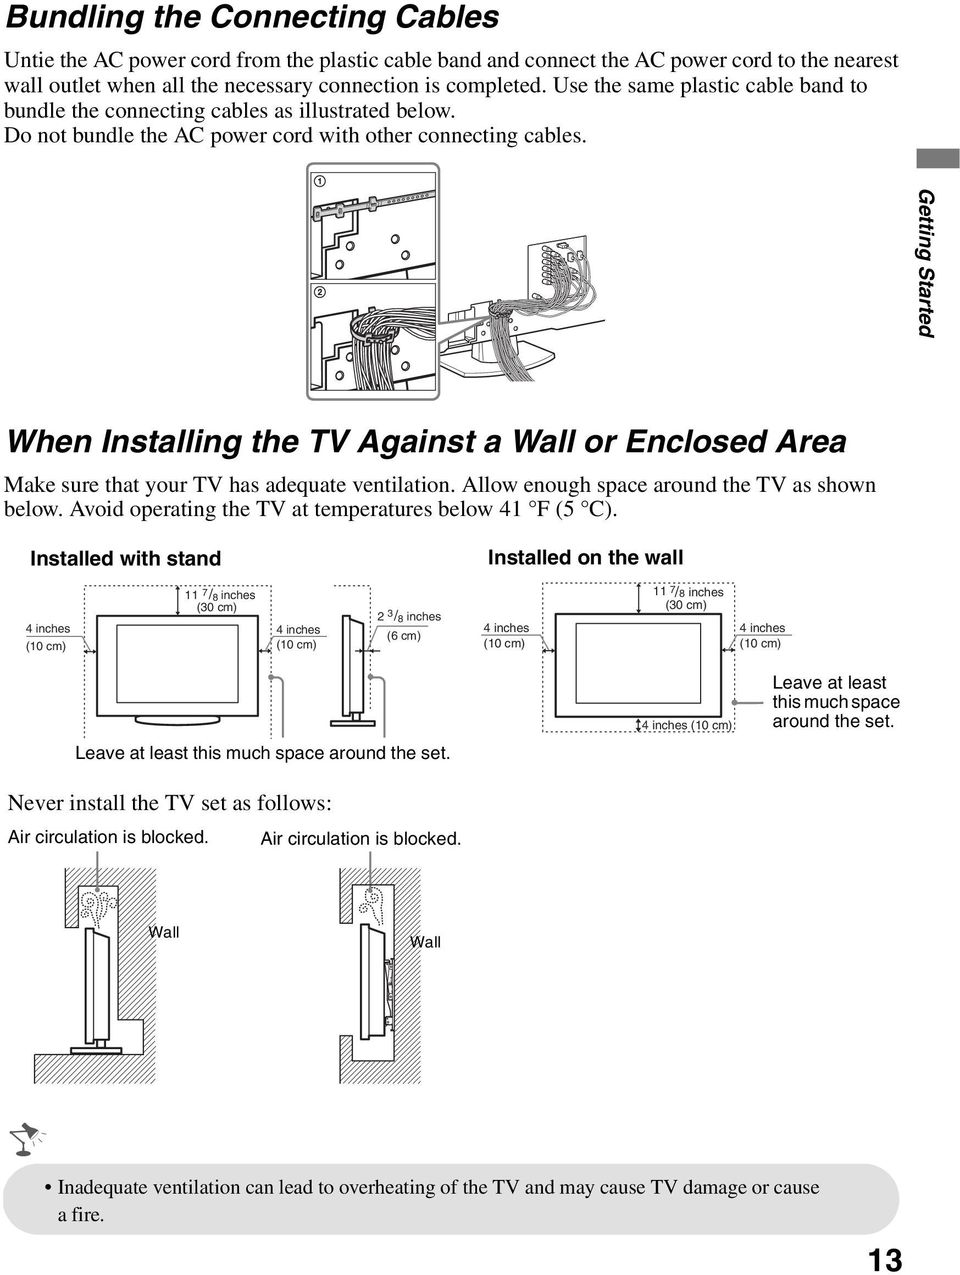 Getting Started When Installing the TV Against a Wall or Enclosed Area Make sure that your TV has adequate ventilation. Allow enough space around the TV as shown below.